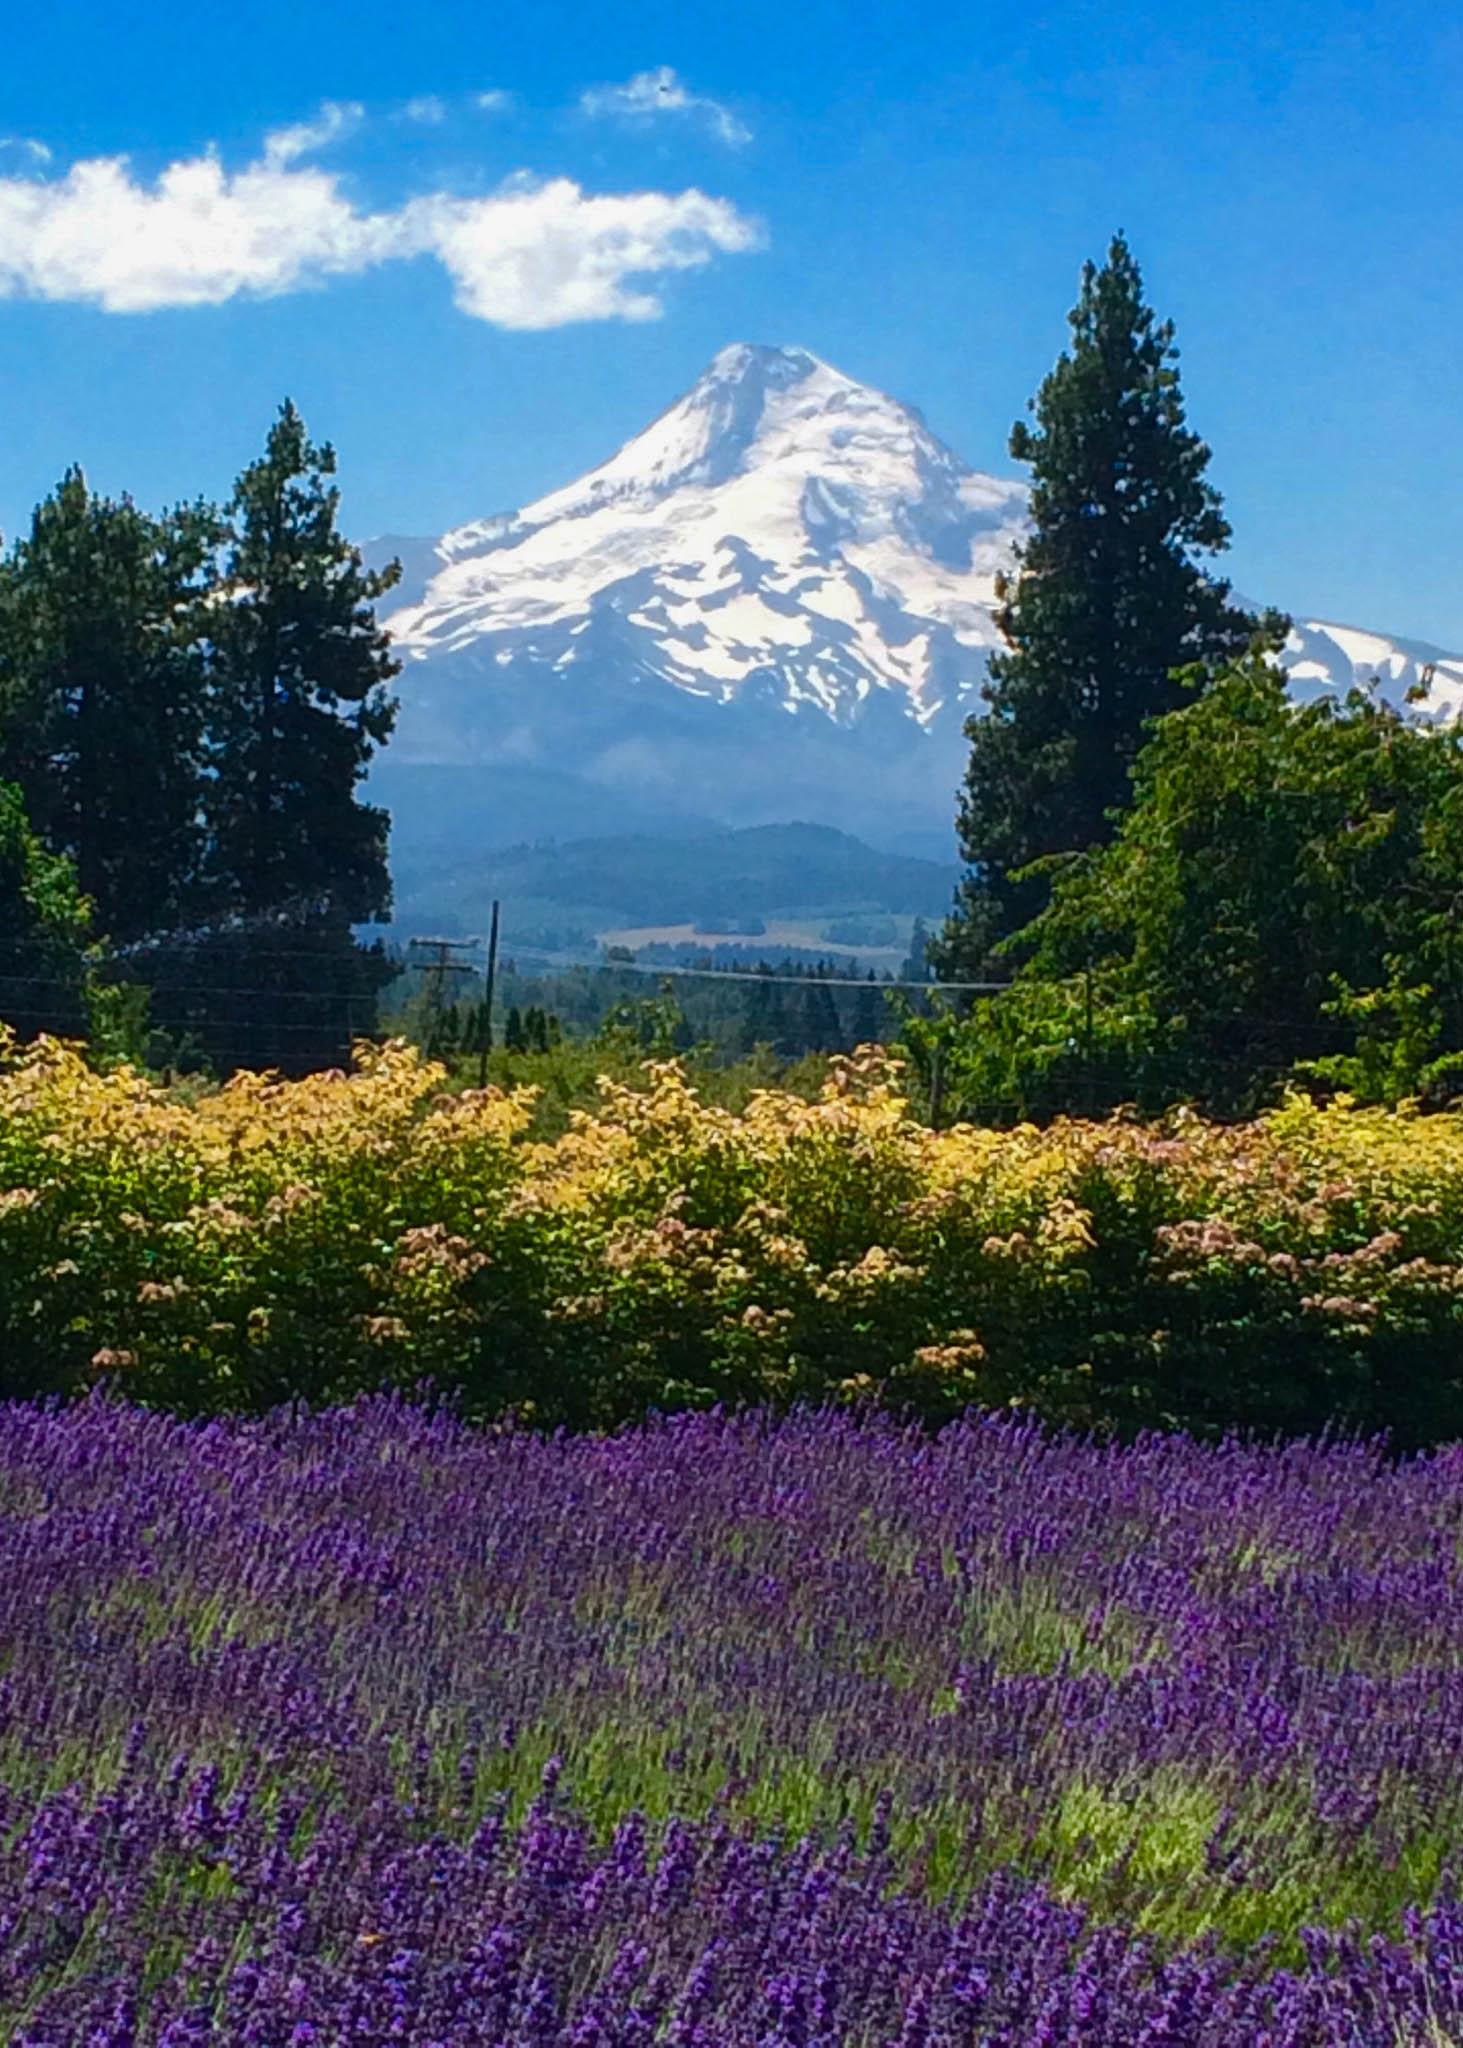 Prime Location for Every Season with Mt. Hood View